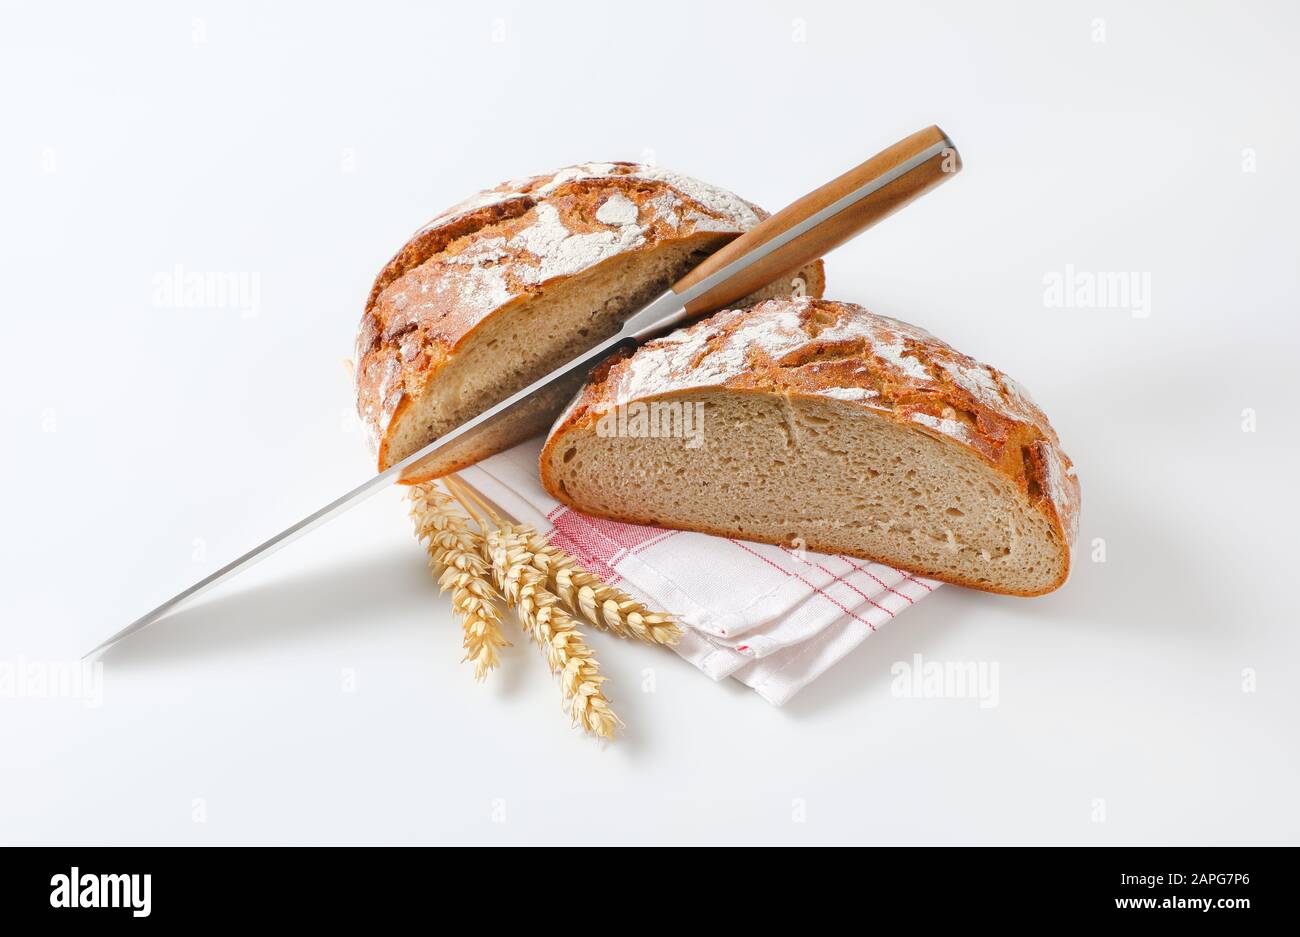 Two halves of a loaf of rustic bread with a knife between them Stock Photo